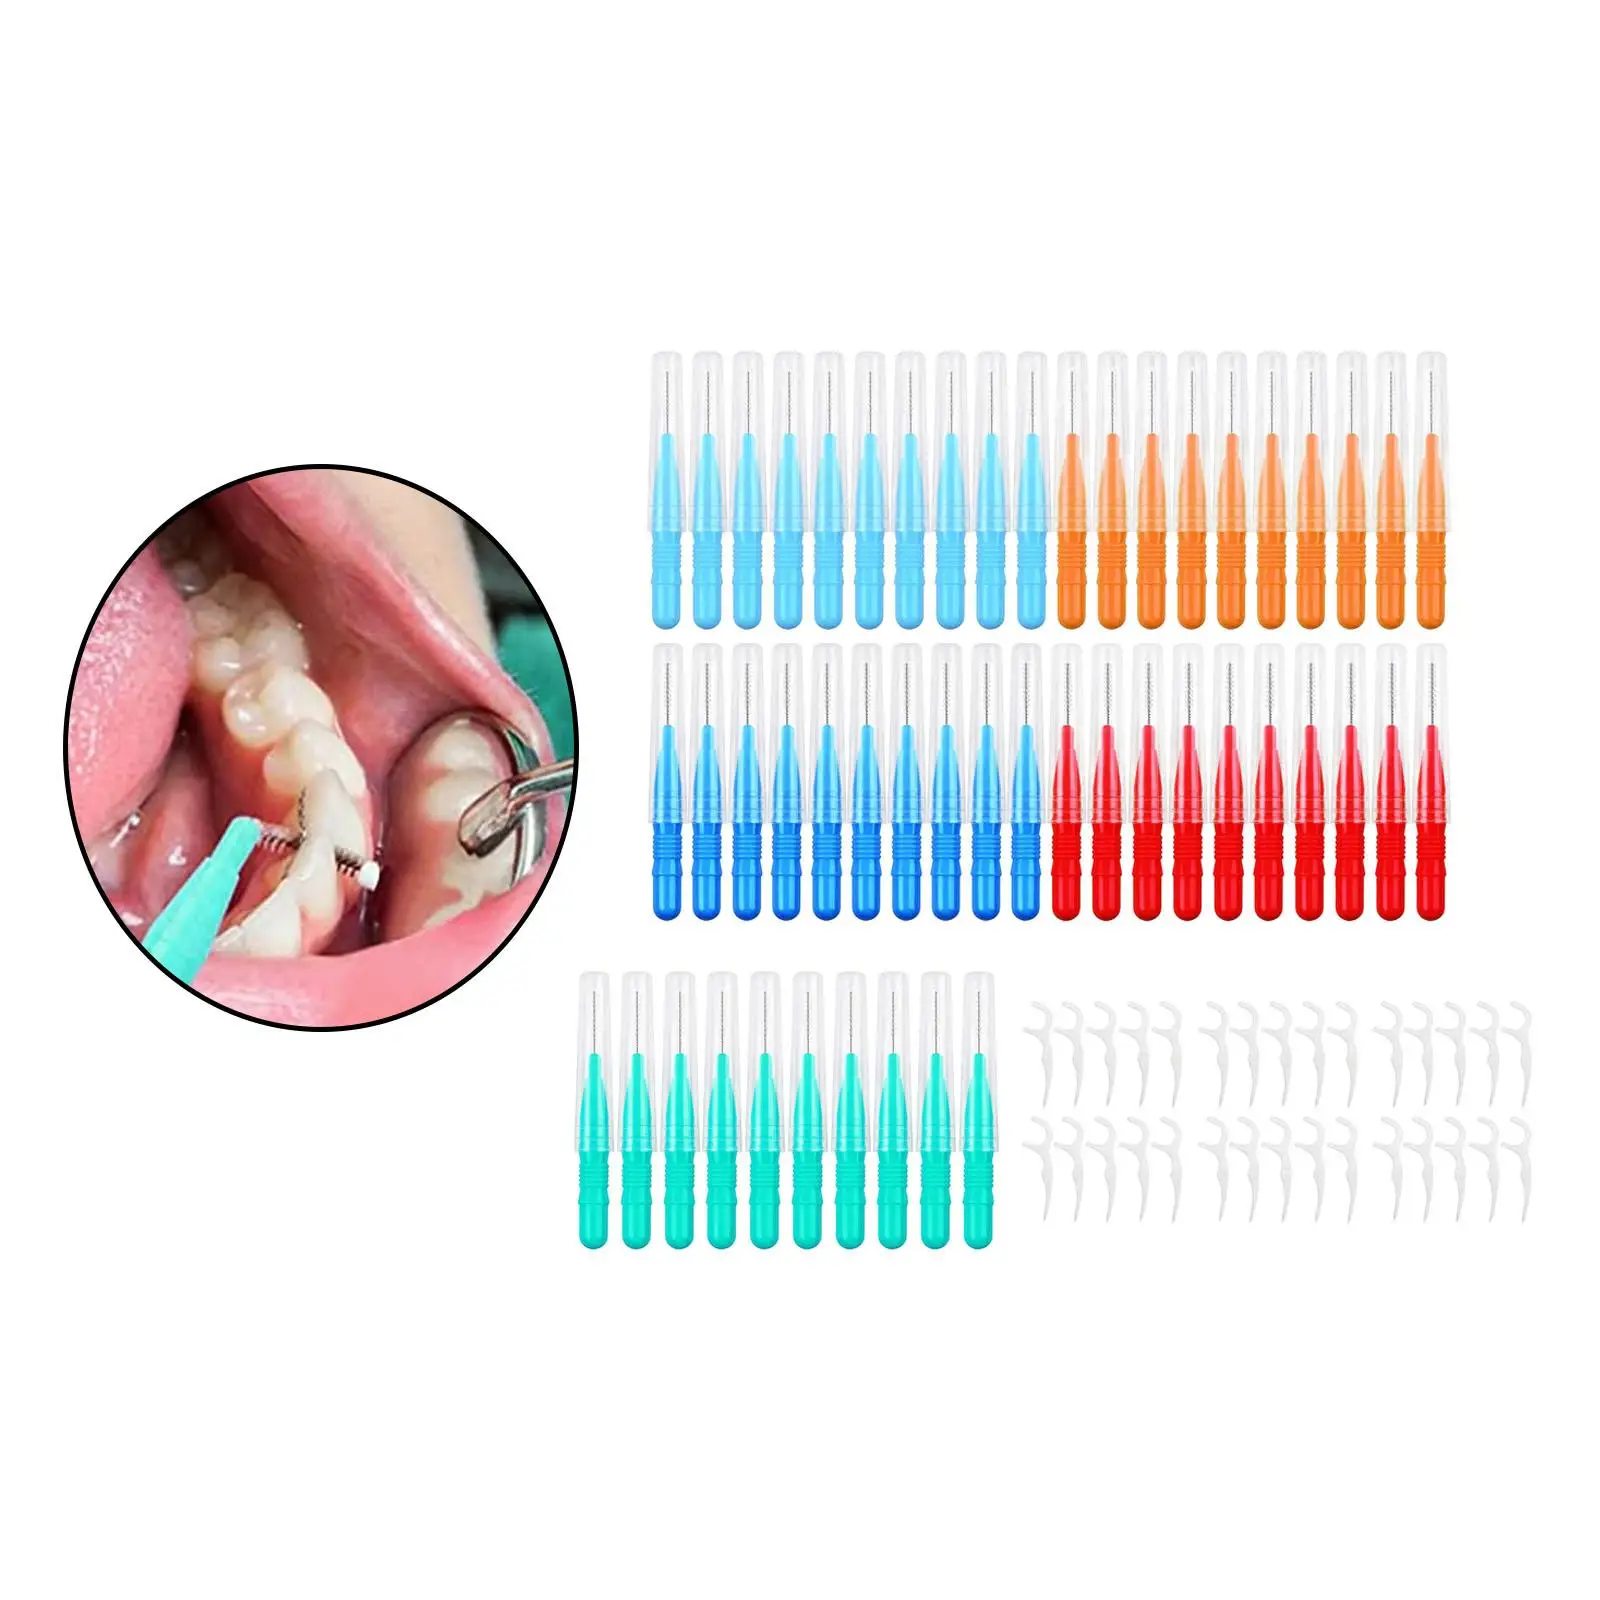 50Pcs Interdental Brushes Tooth Cleaning 30x Dental Floss Flossers